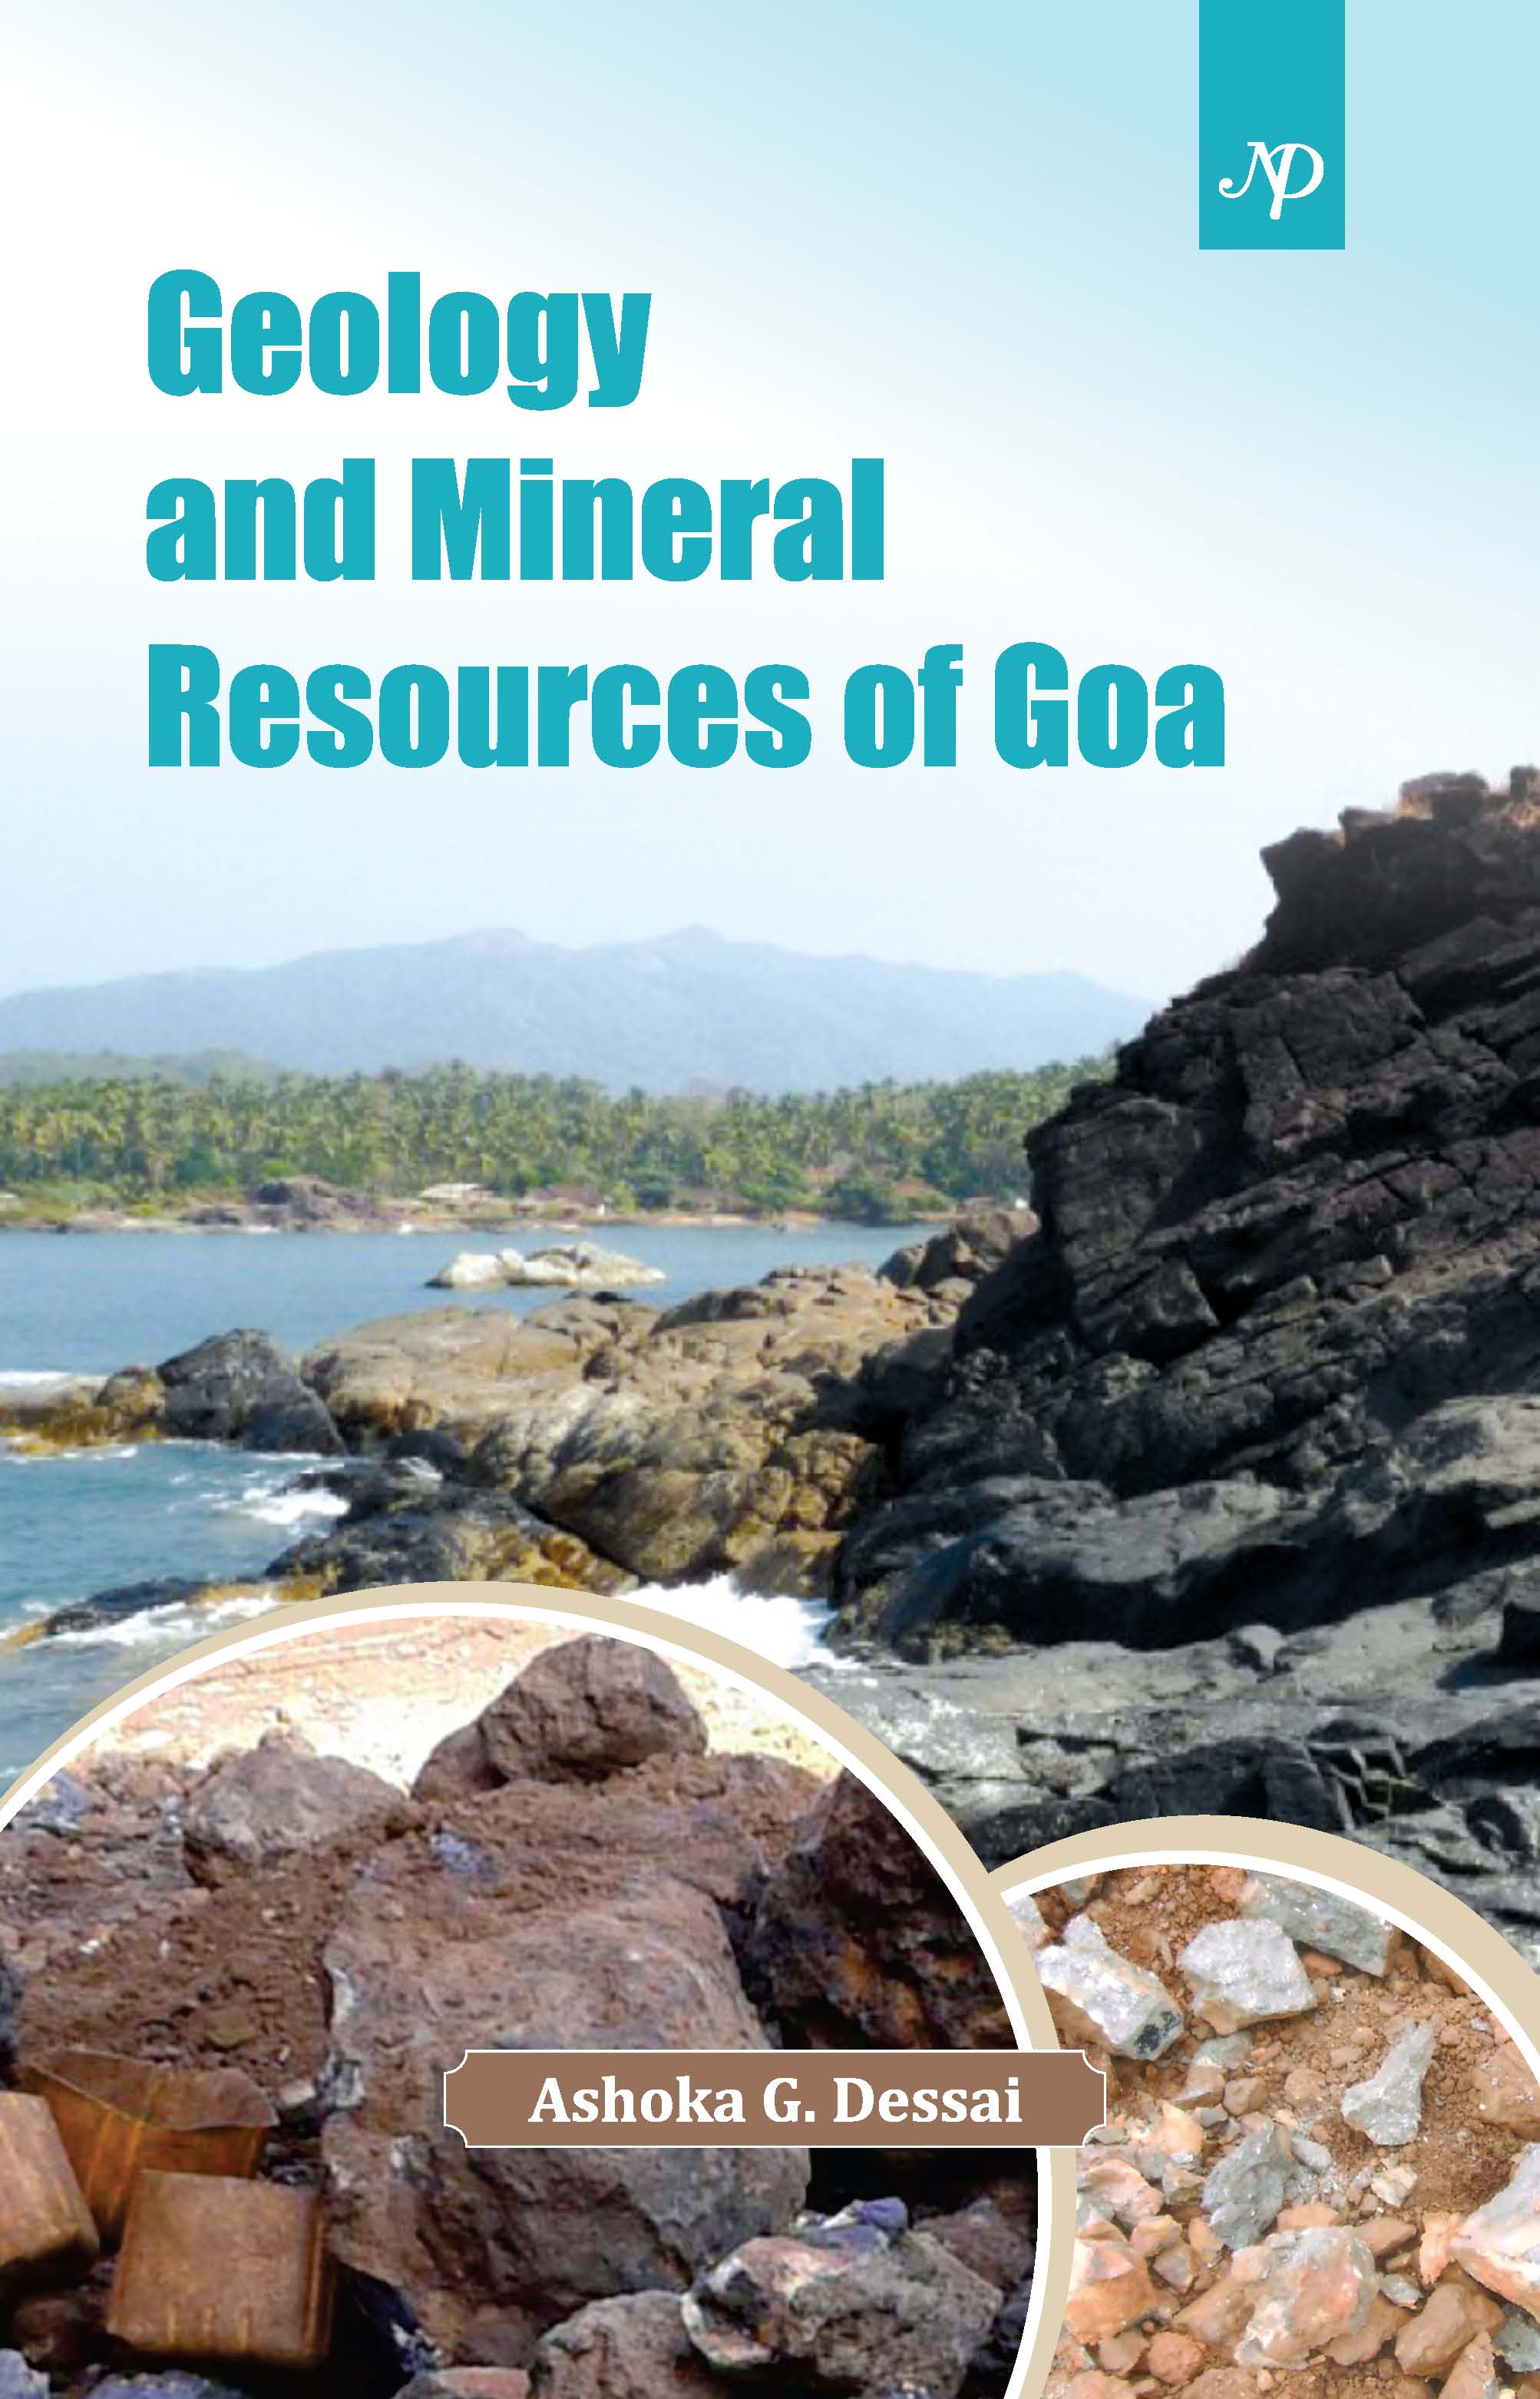 Geology and Mineral Resource in goa.jpg